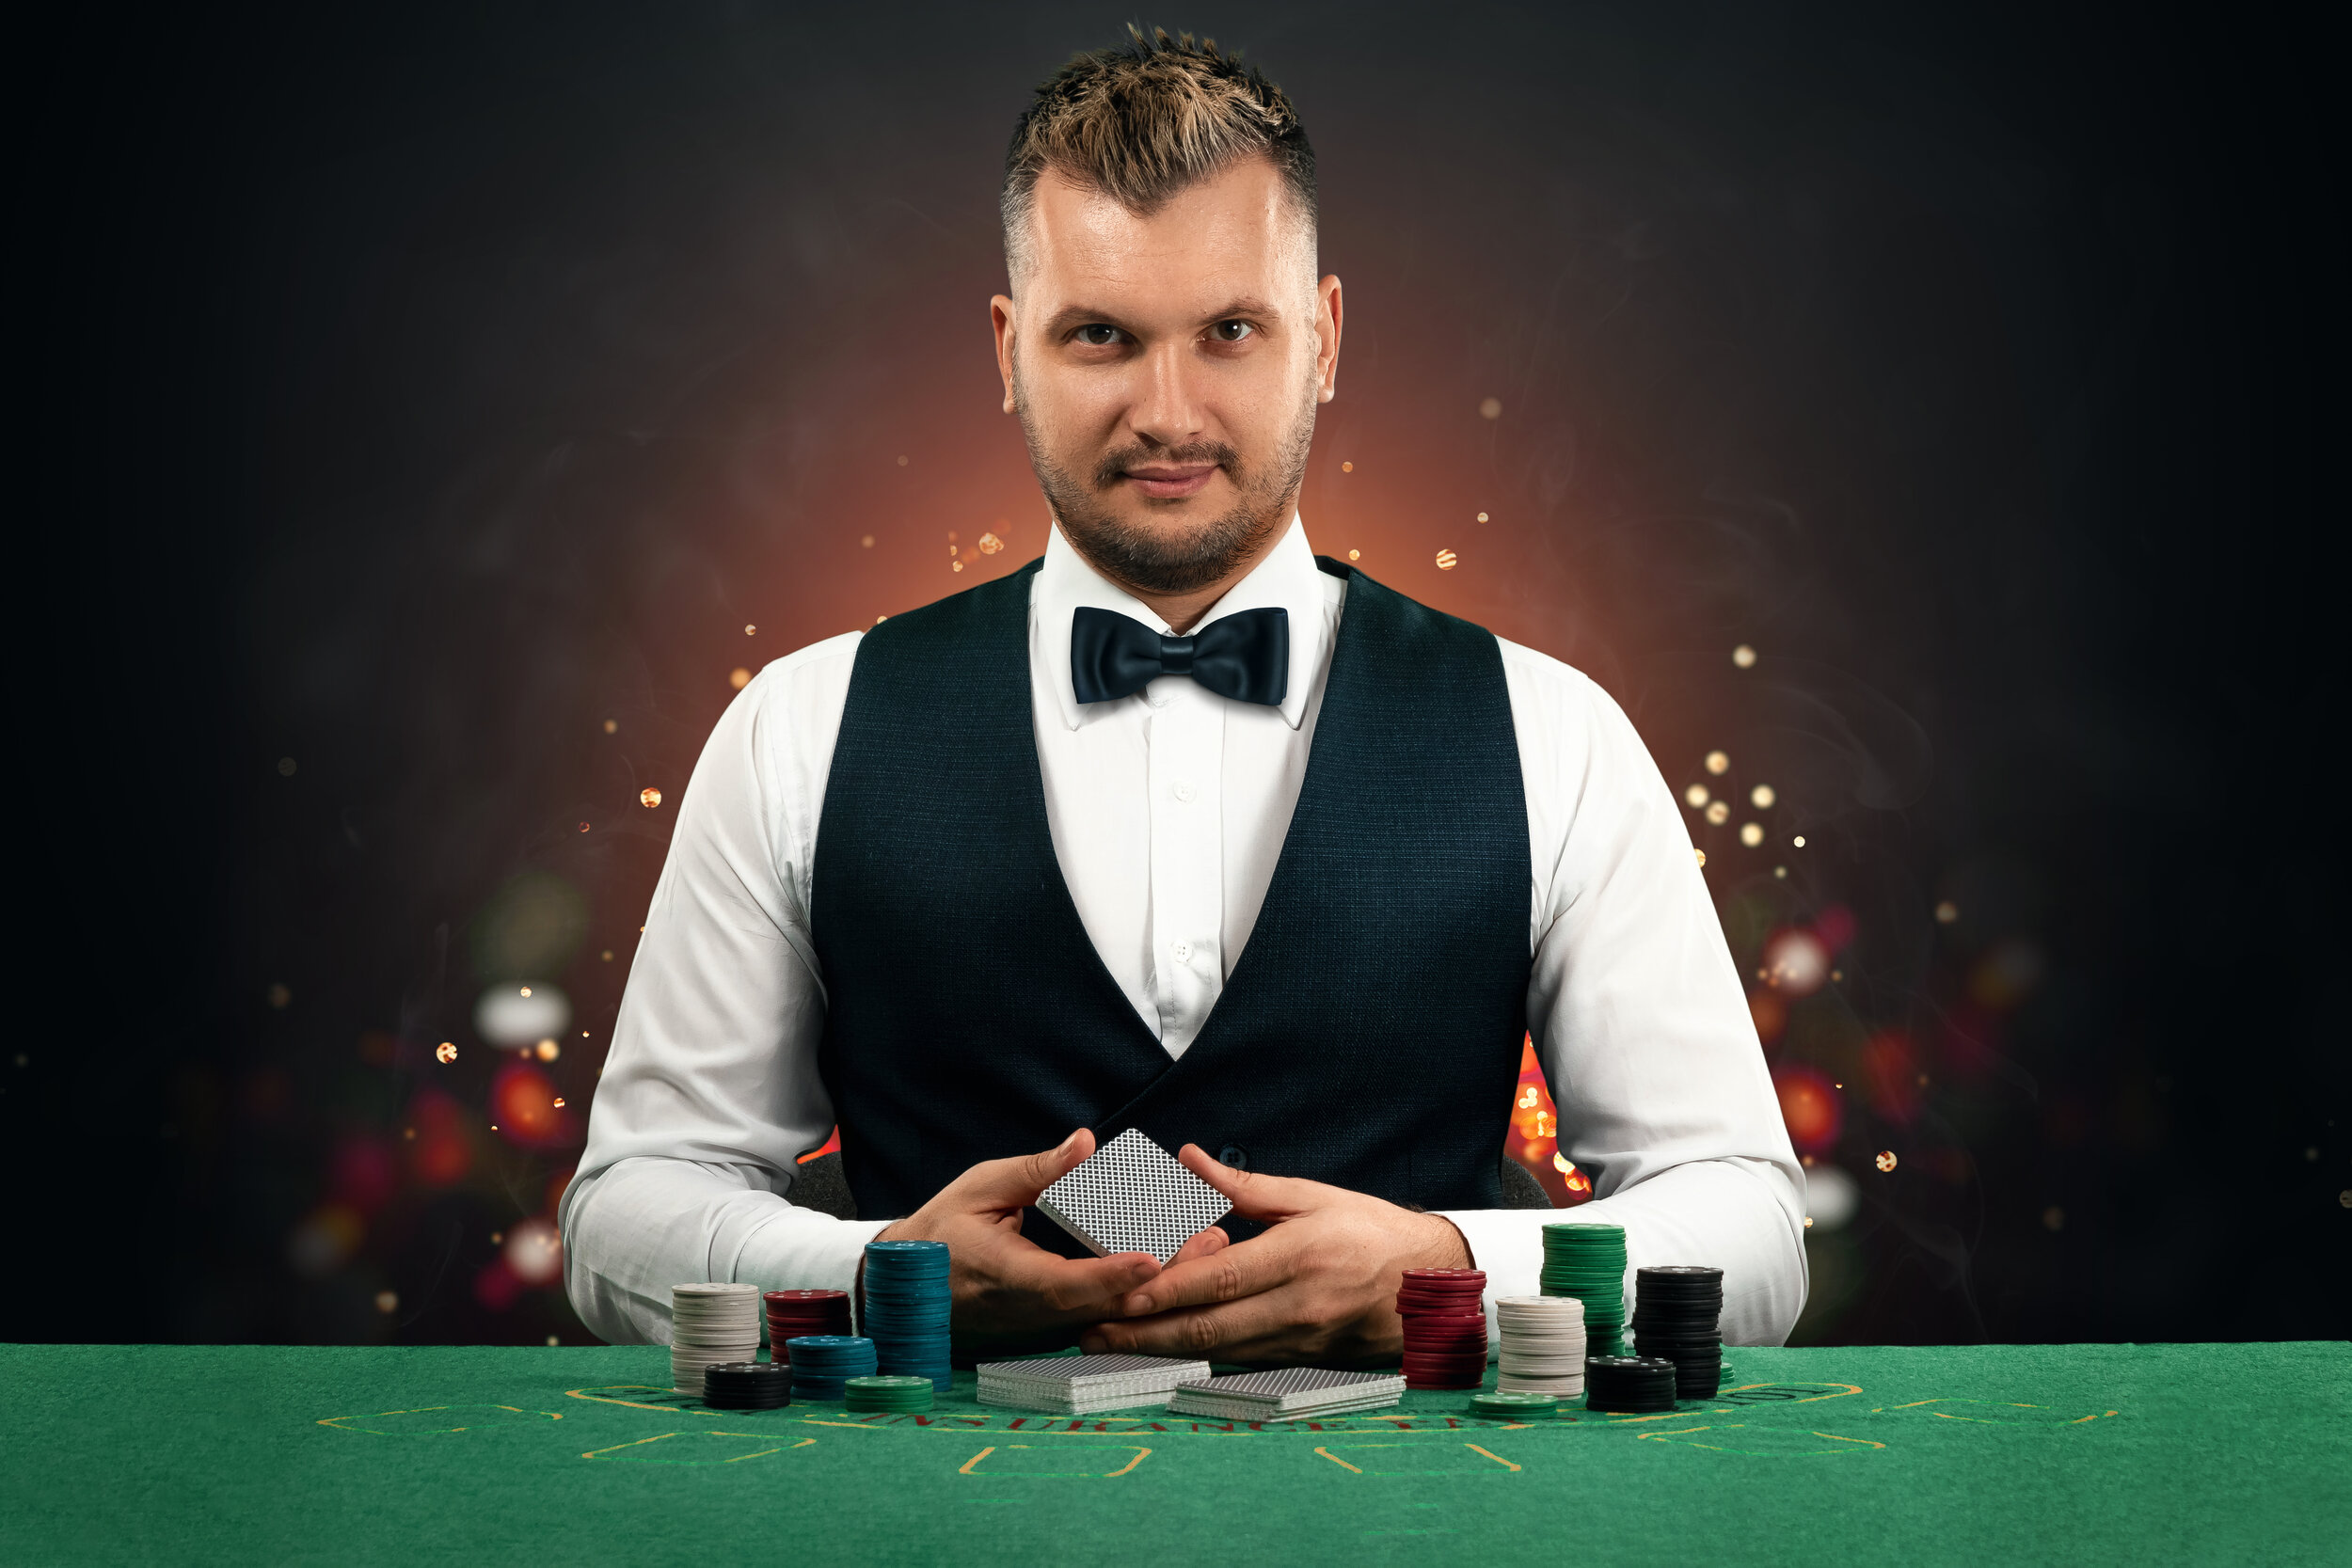 Gambling Enterprise Dealer FAQs: Getting to Know Your Hosts